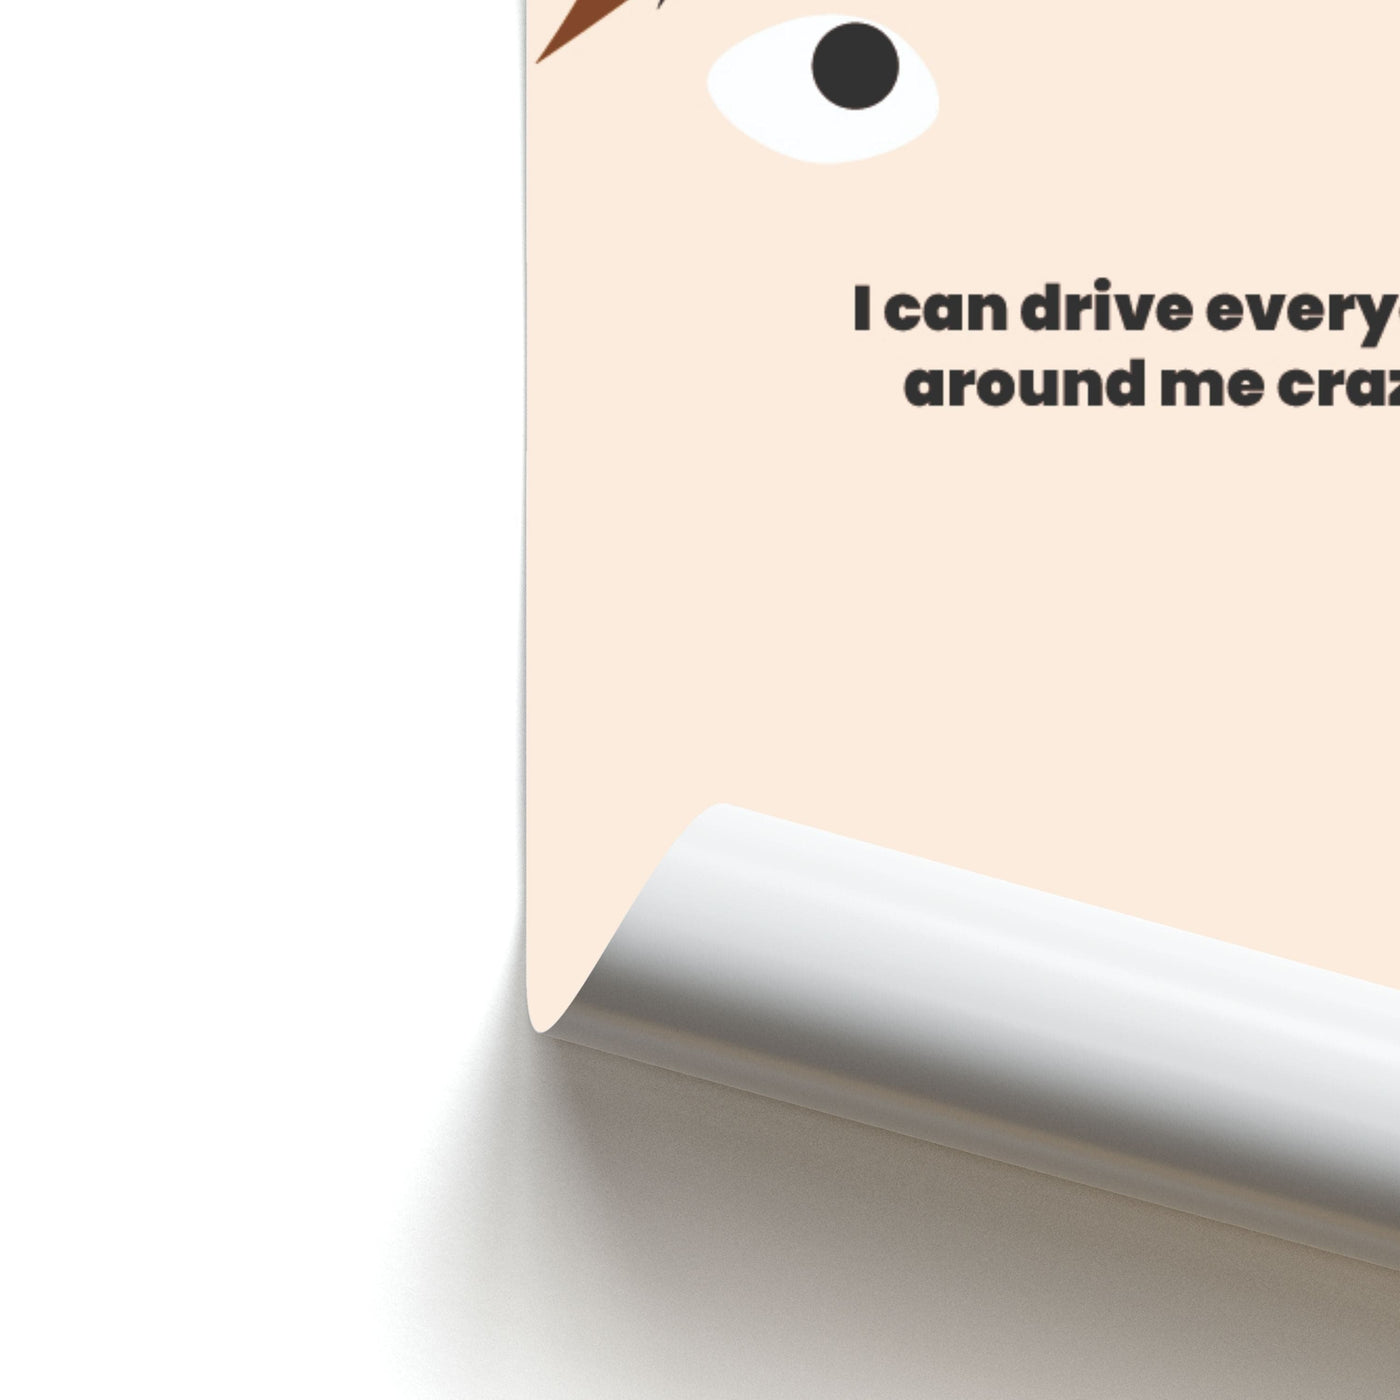 I can drive everyone around me crazy - Kris Jenner Poster